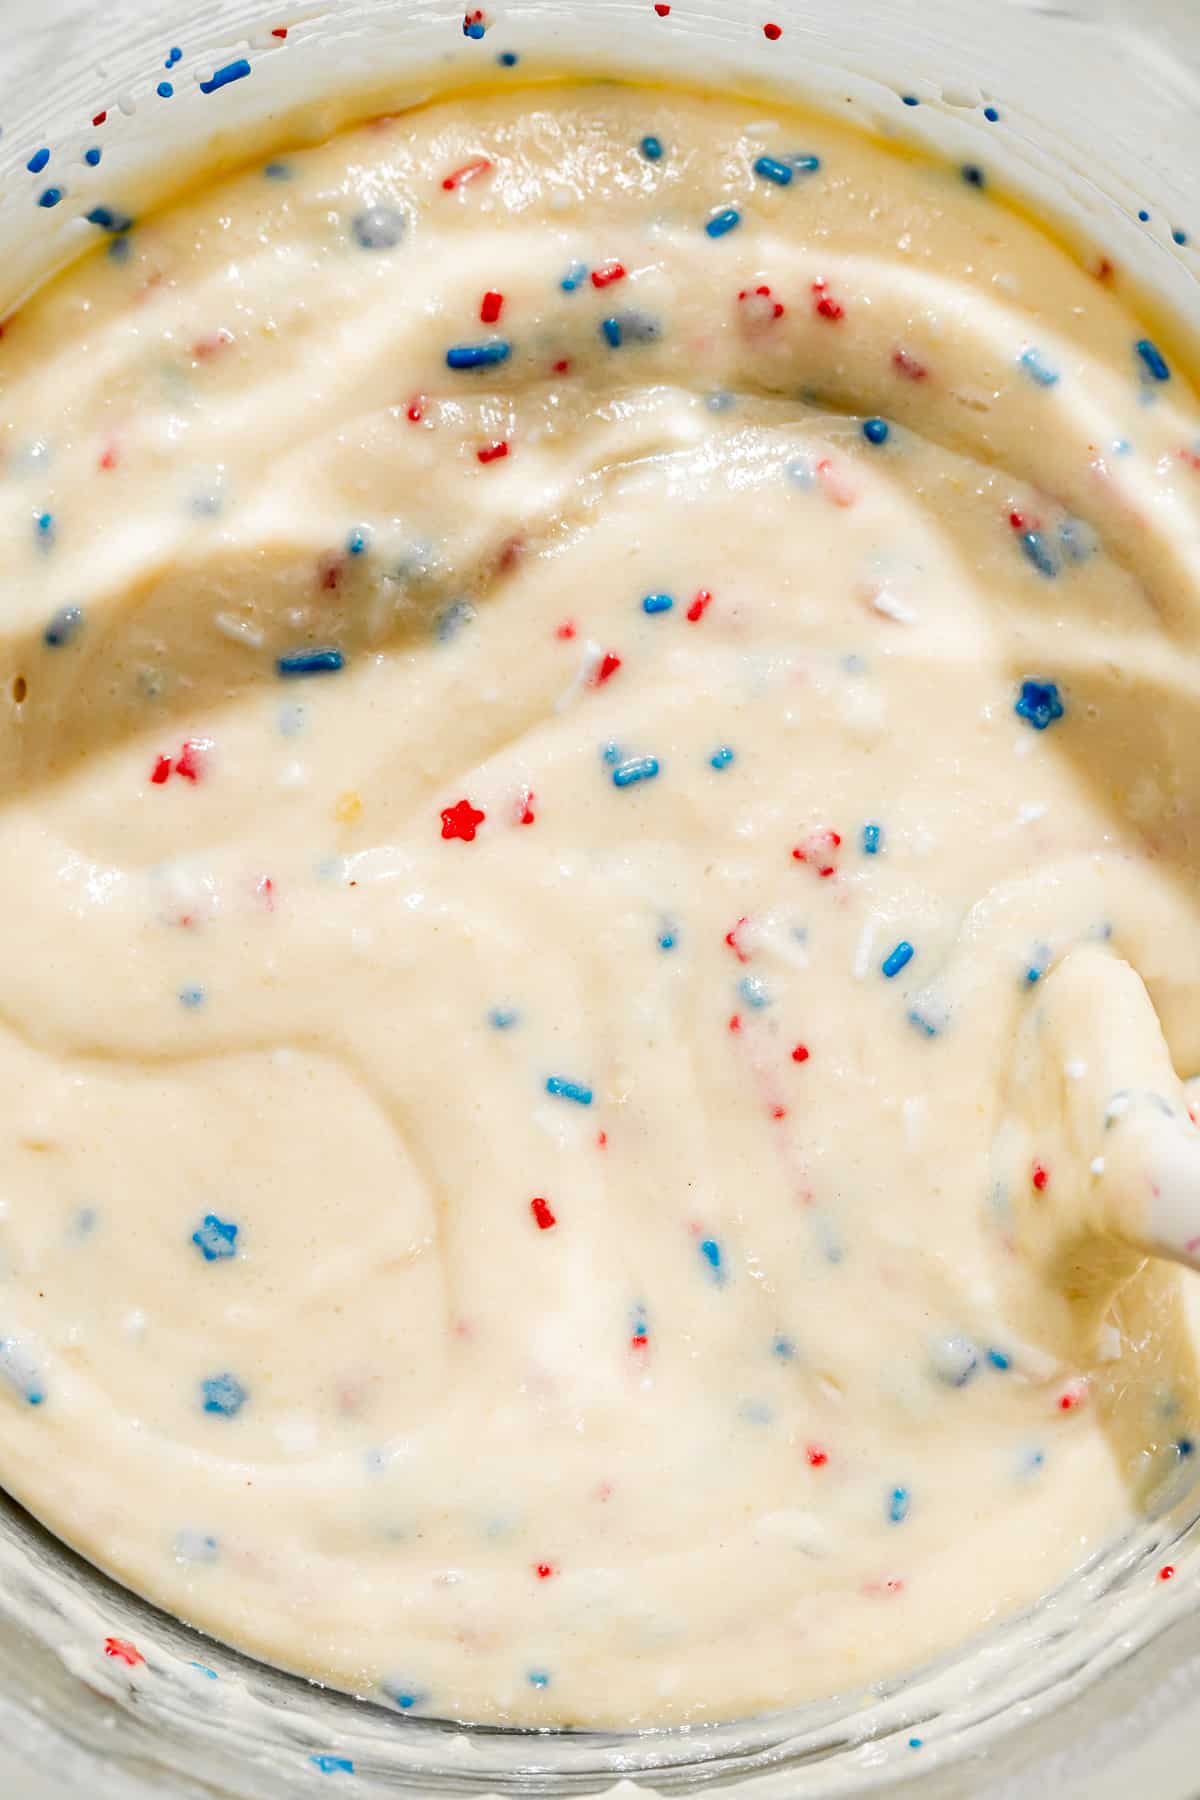 red, white, and blue sprinkles folded into cake batter.